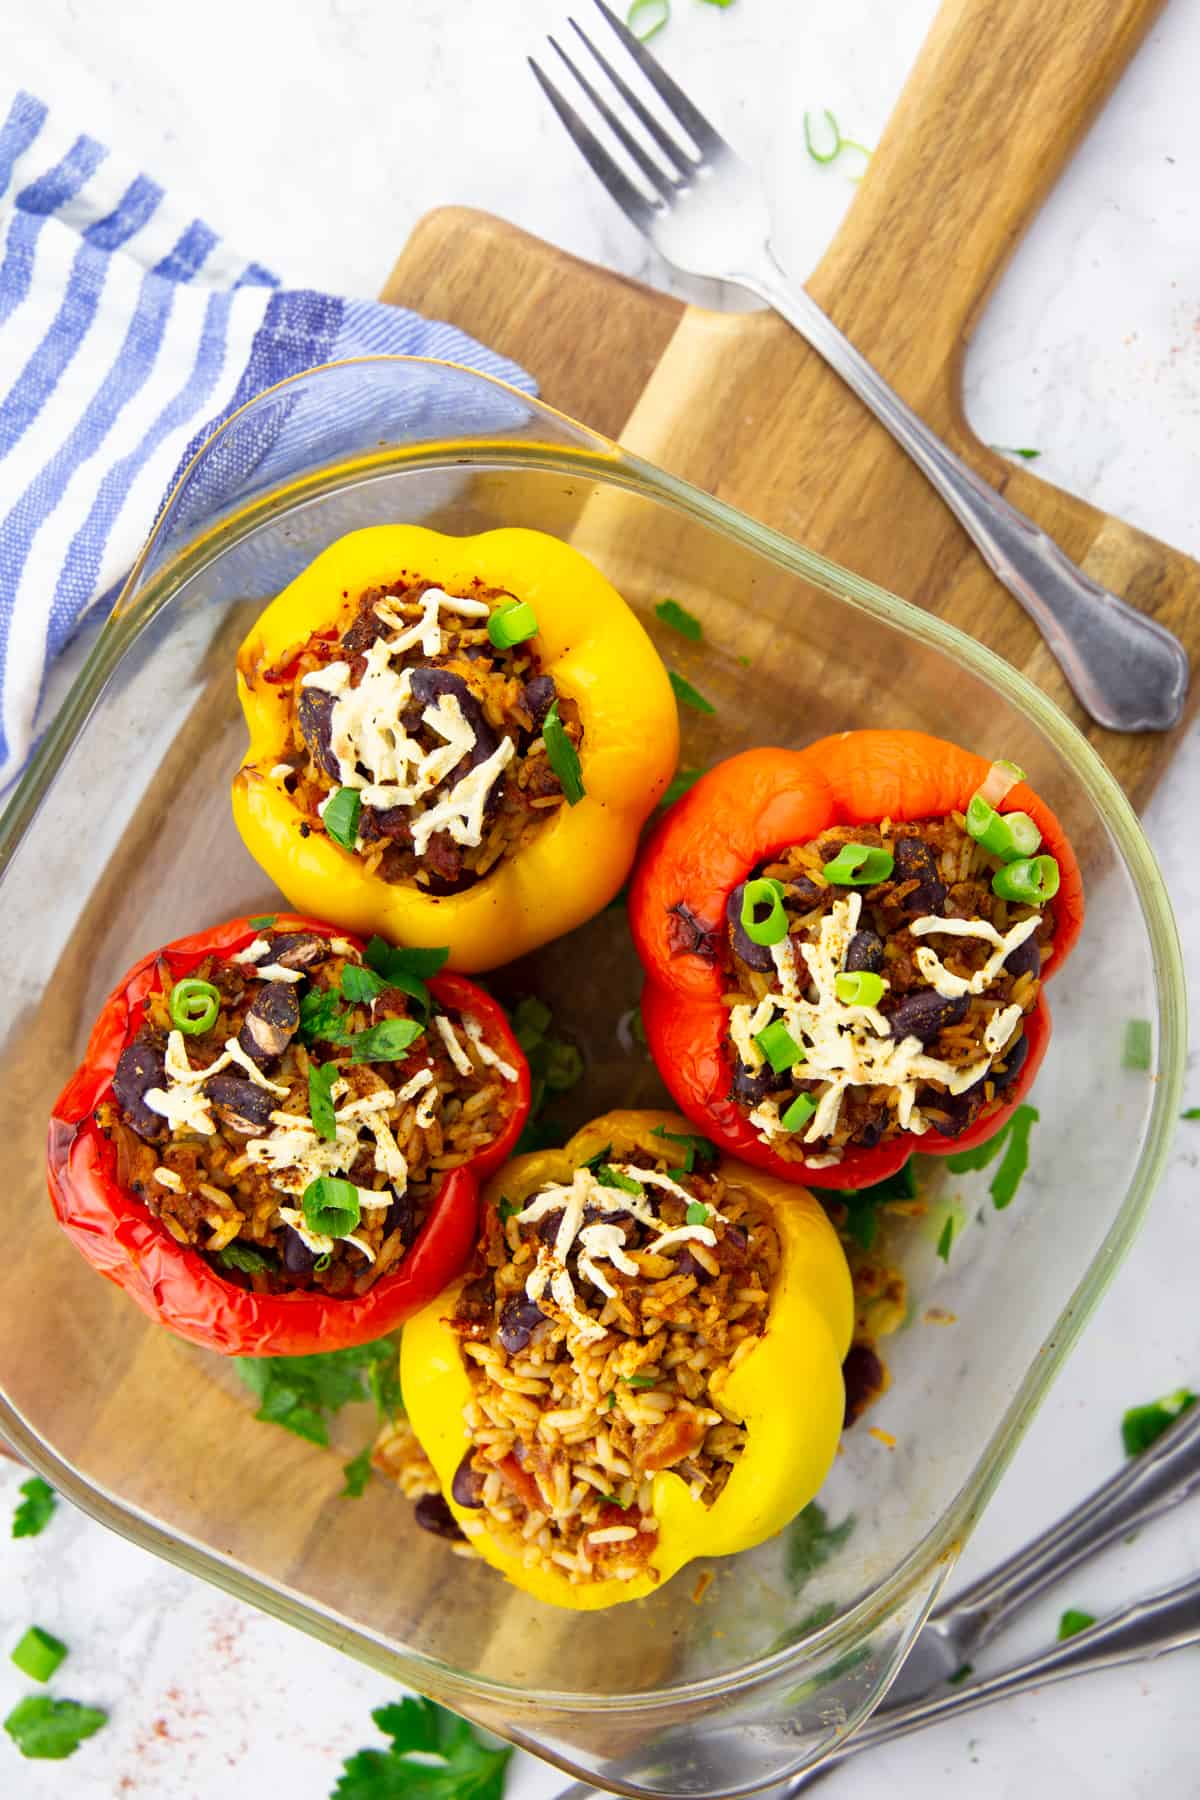 four vegan stuffed peppers in a glass casserole dish fresh out of the oven